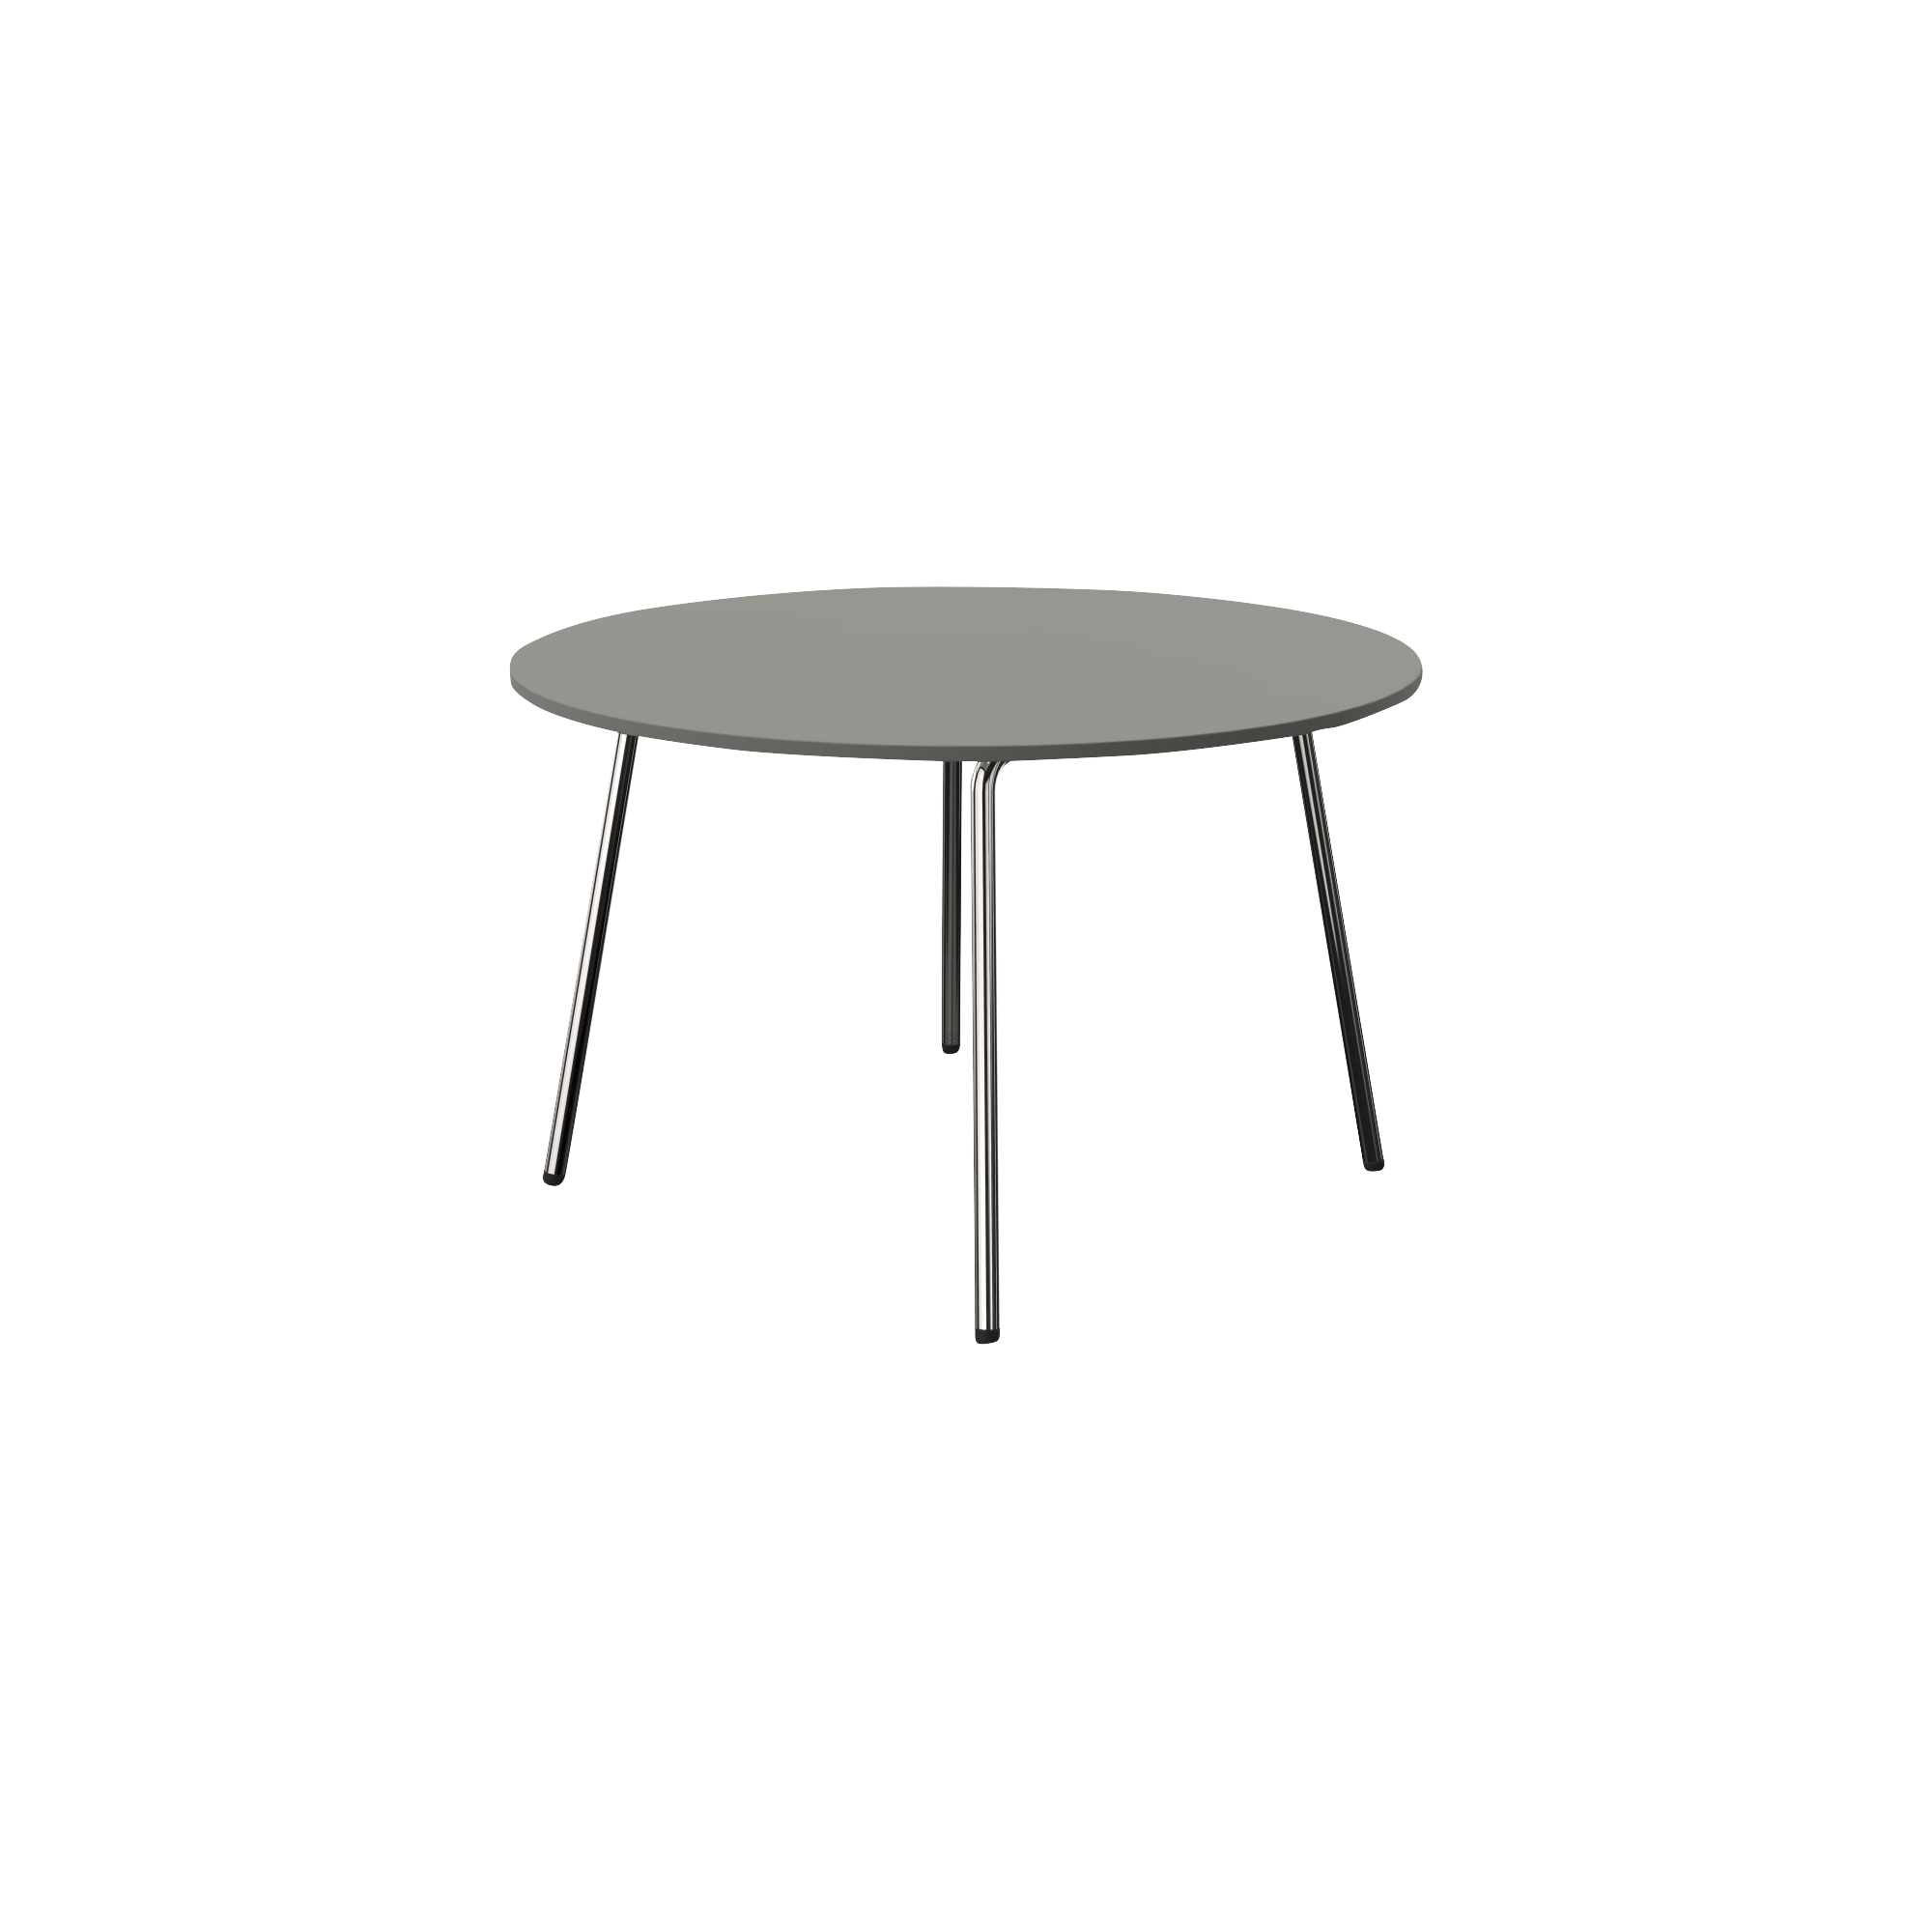 A round table with metal legs